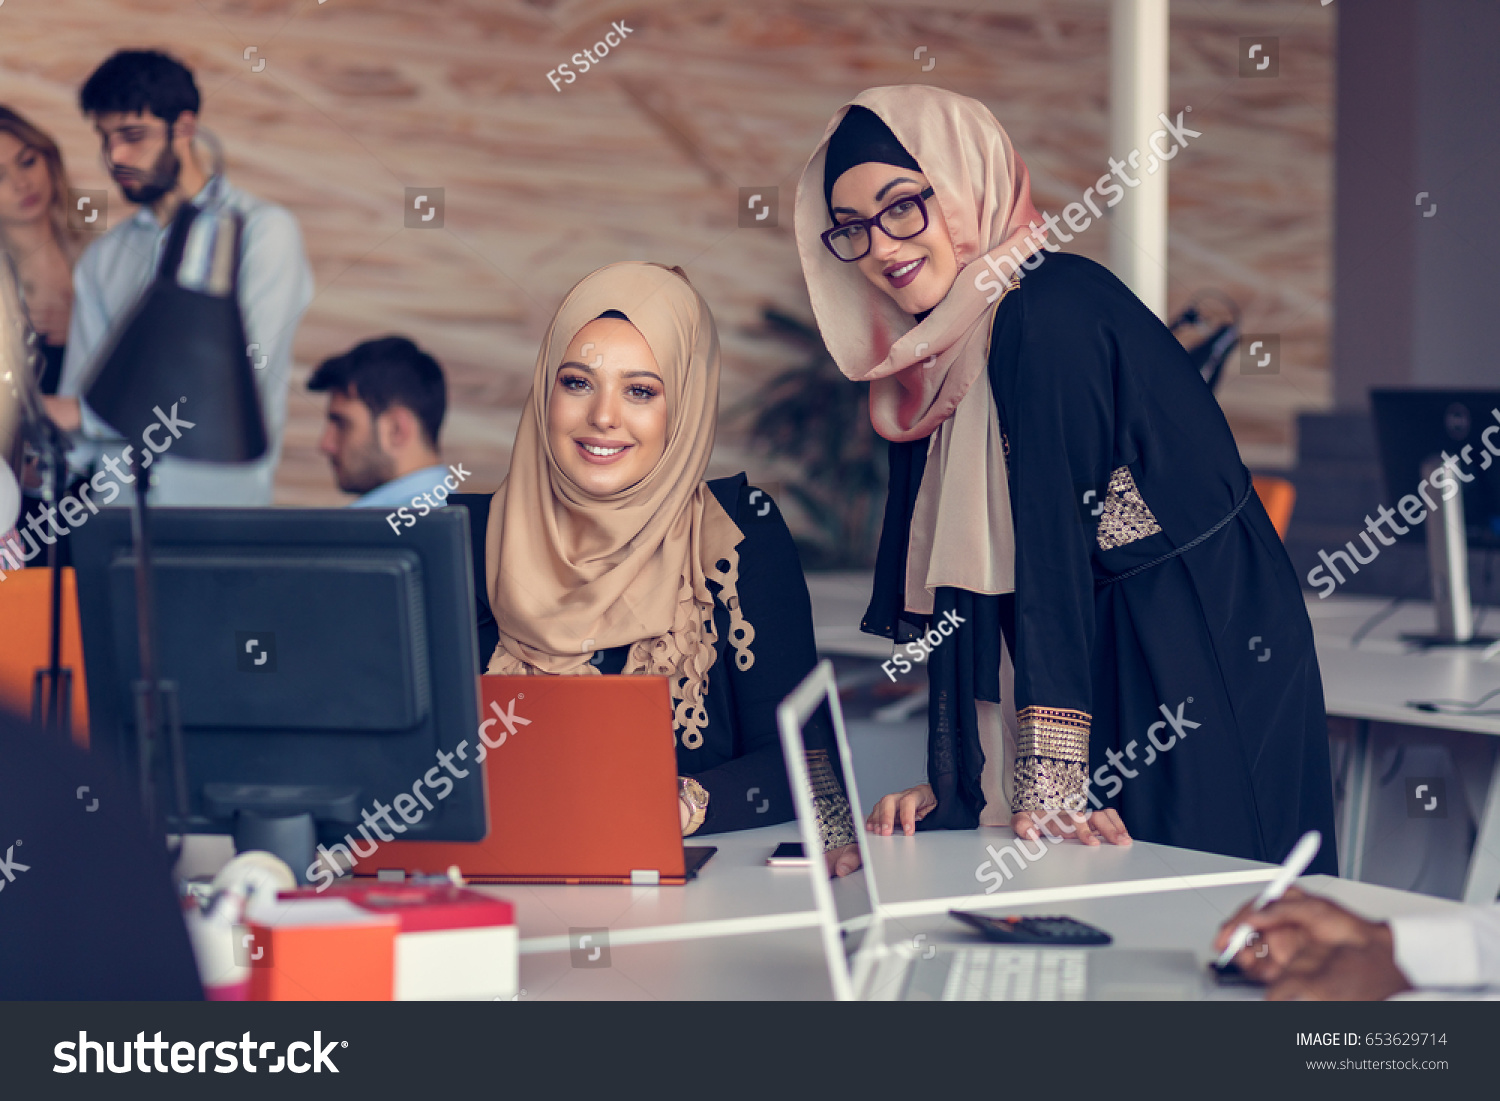 Two woman with hijab working on laptop in office. #653629714